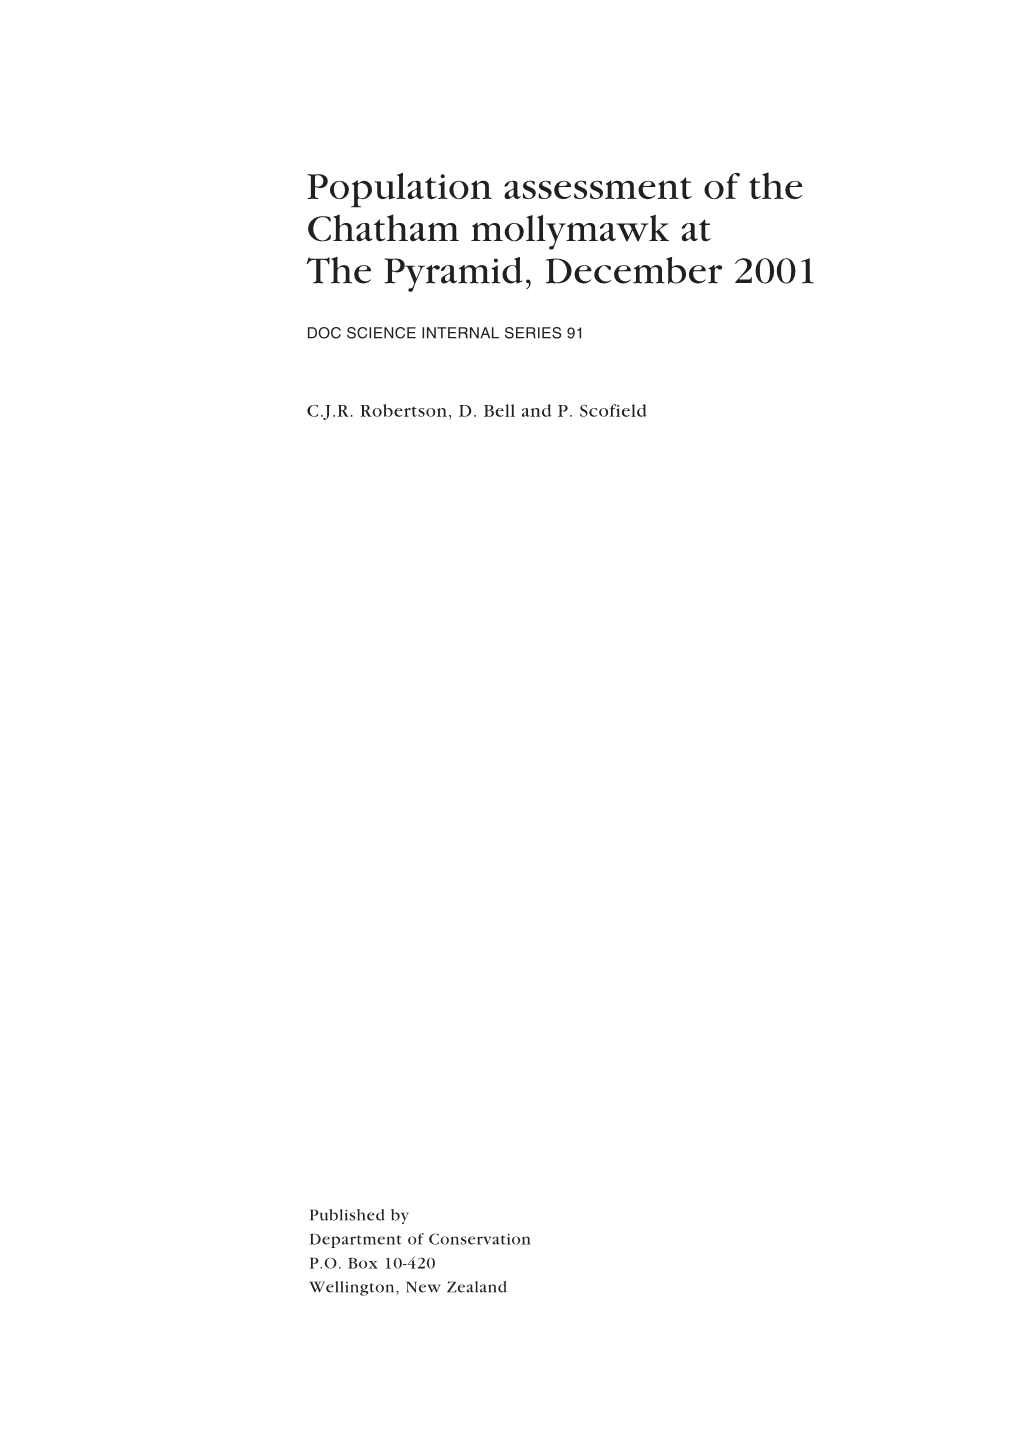 Population Assessment of the Chatham Mollymawk at the Pyramid, December 2001